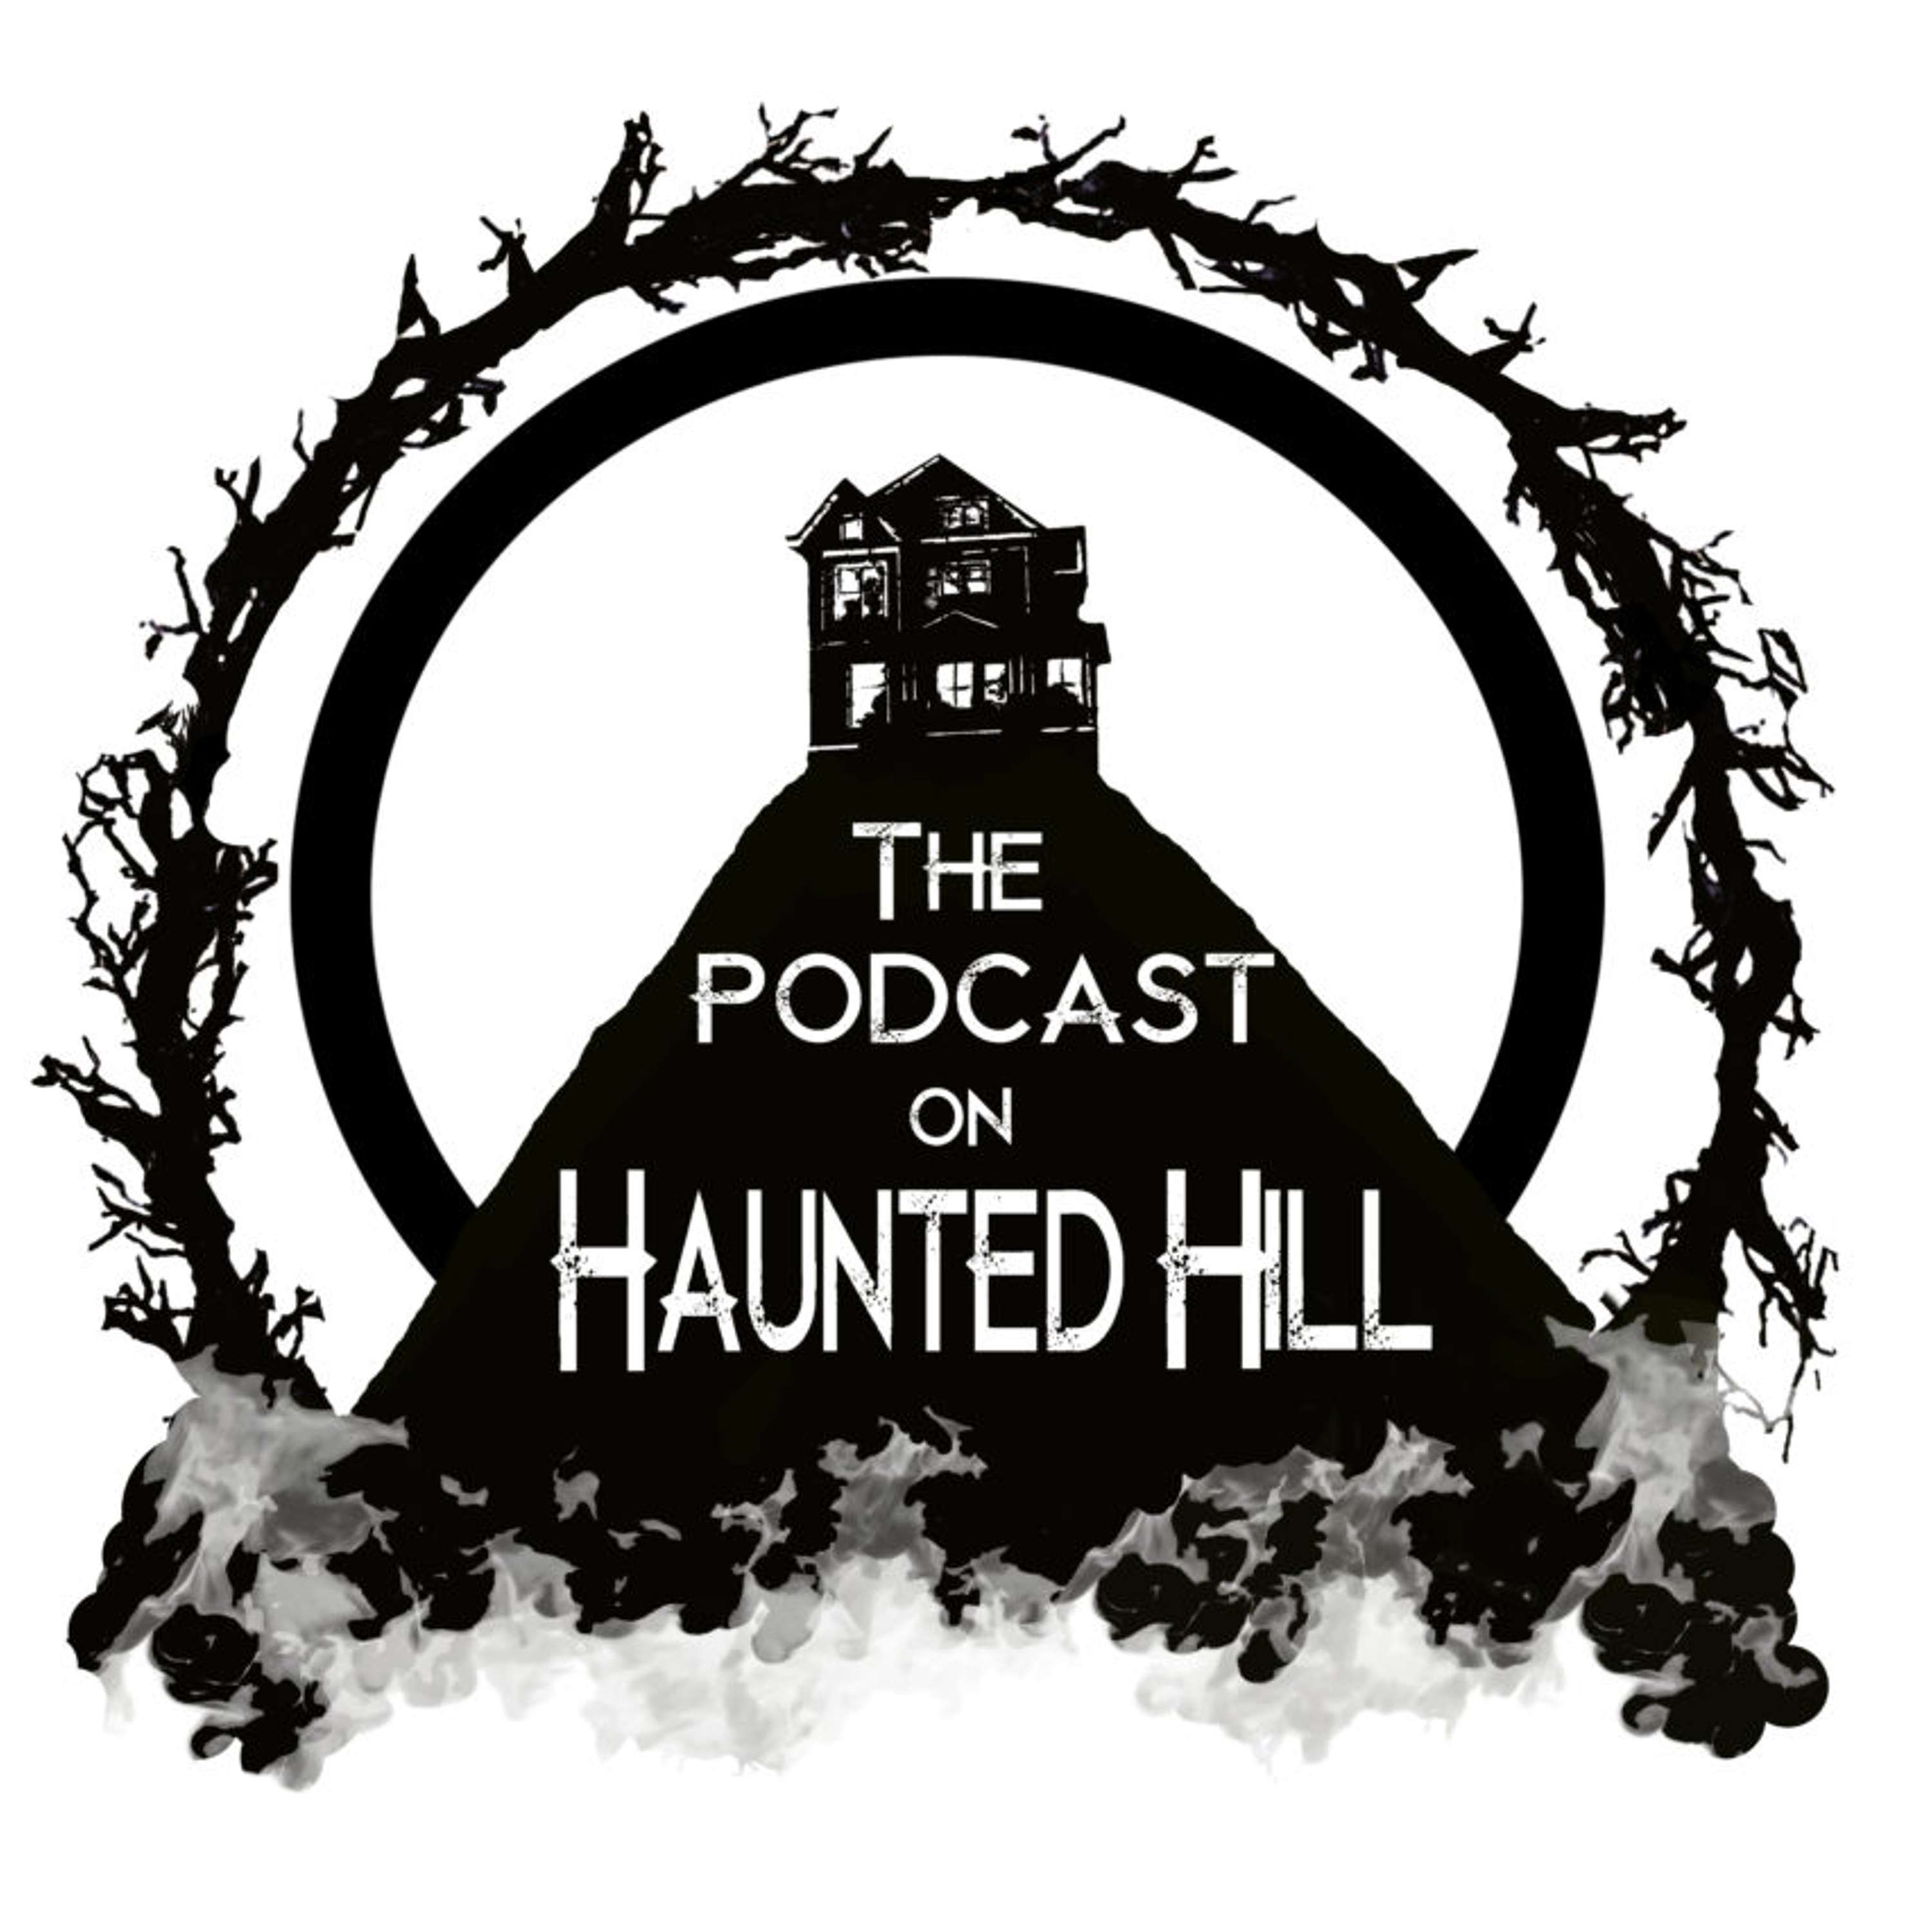 THE PODCAST ON HAUNTED HILL EPISODE 109 – THE HOUSE OF THE DEVIL AND THE BABYSITTER